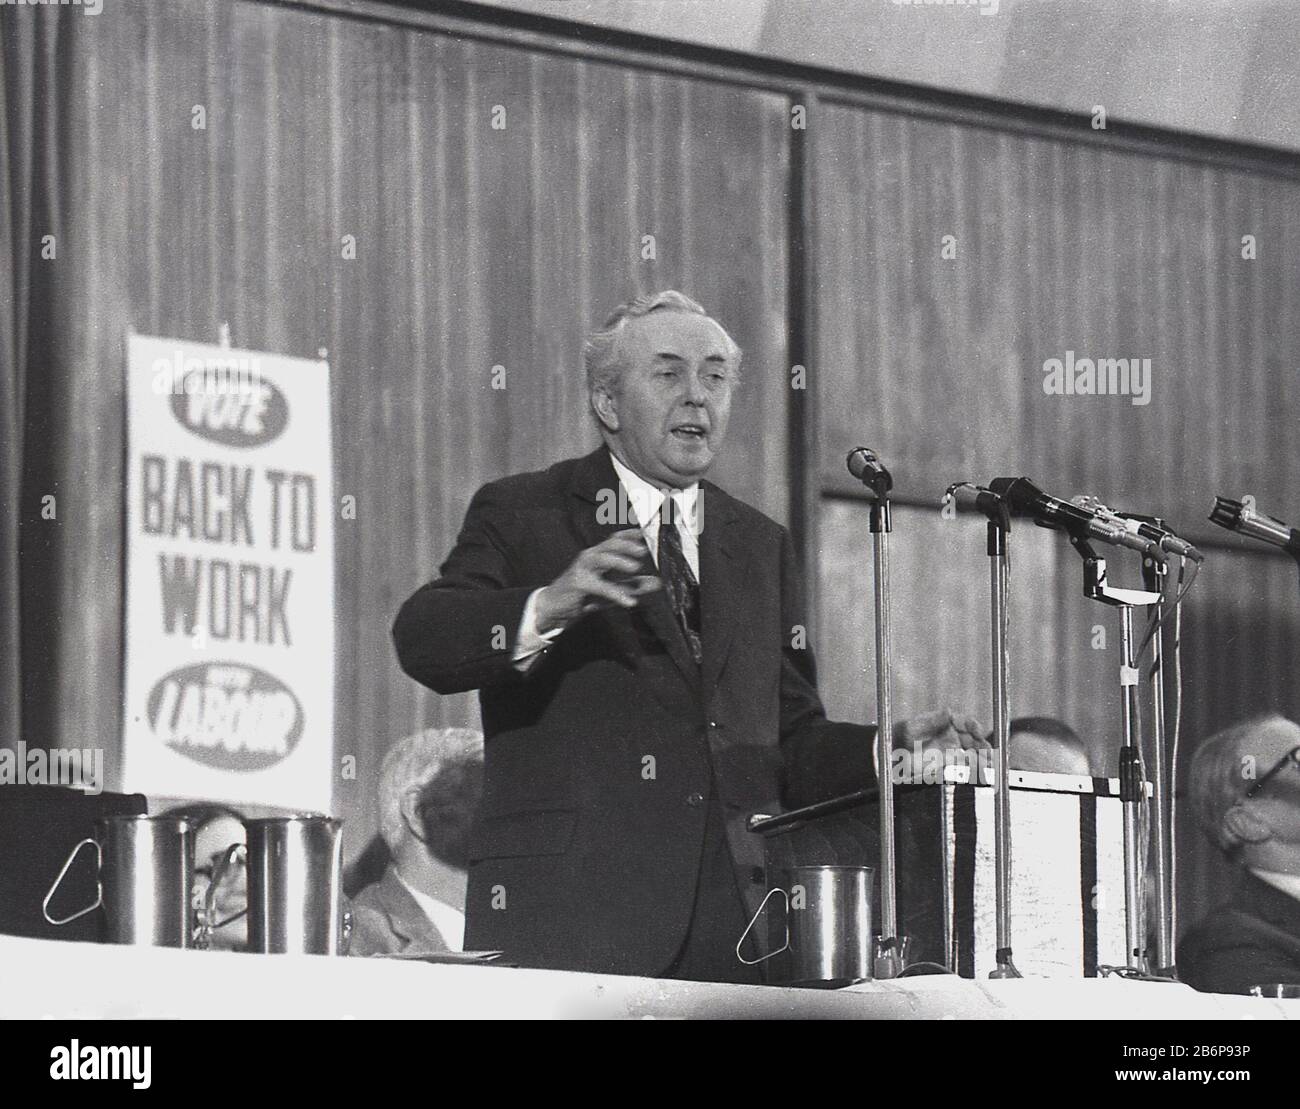 1972, historical Labour party leader Harold Wilson on a platform speaking at an event in Lewisham South east London, England, UK. Stock Photo